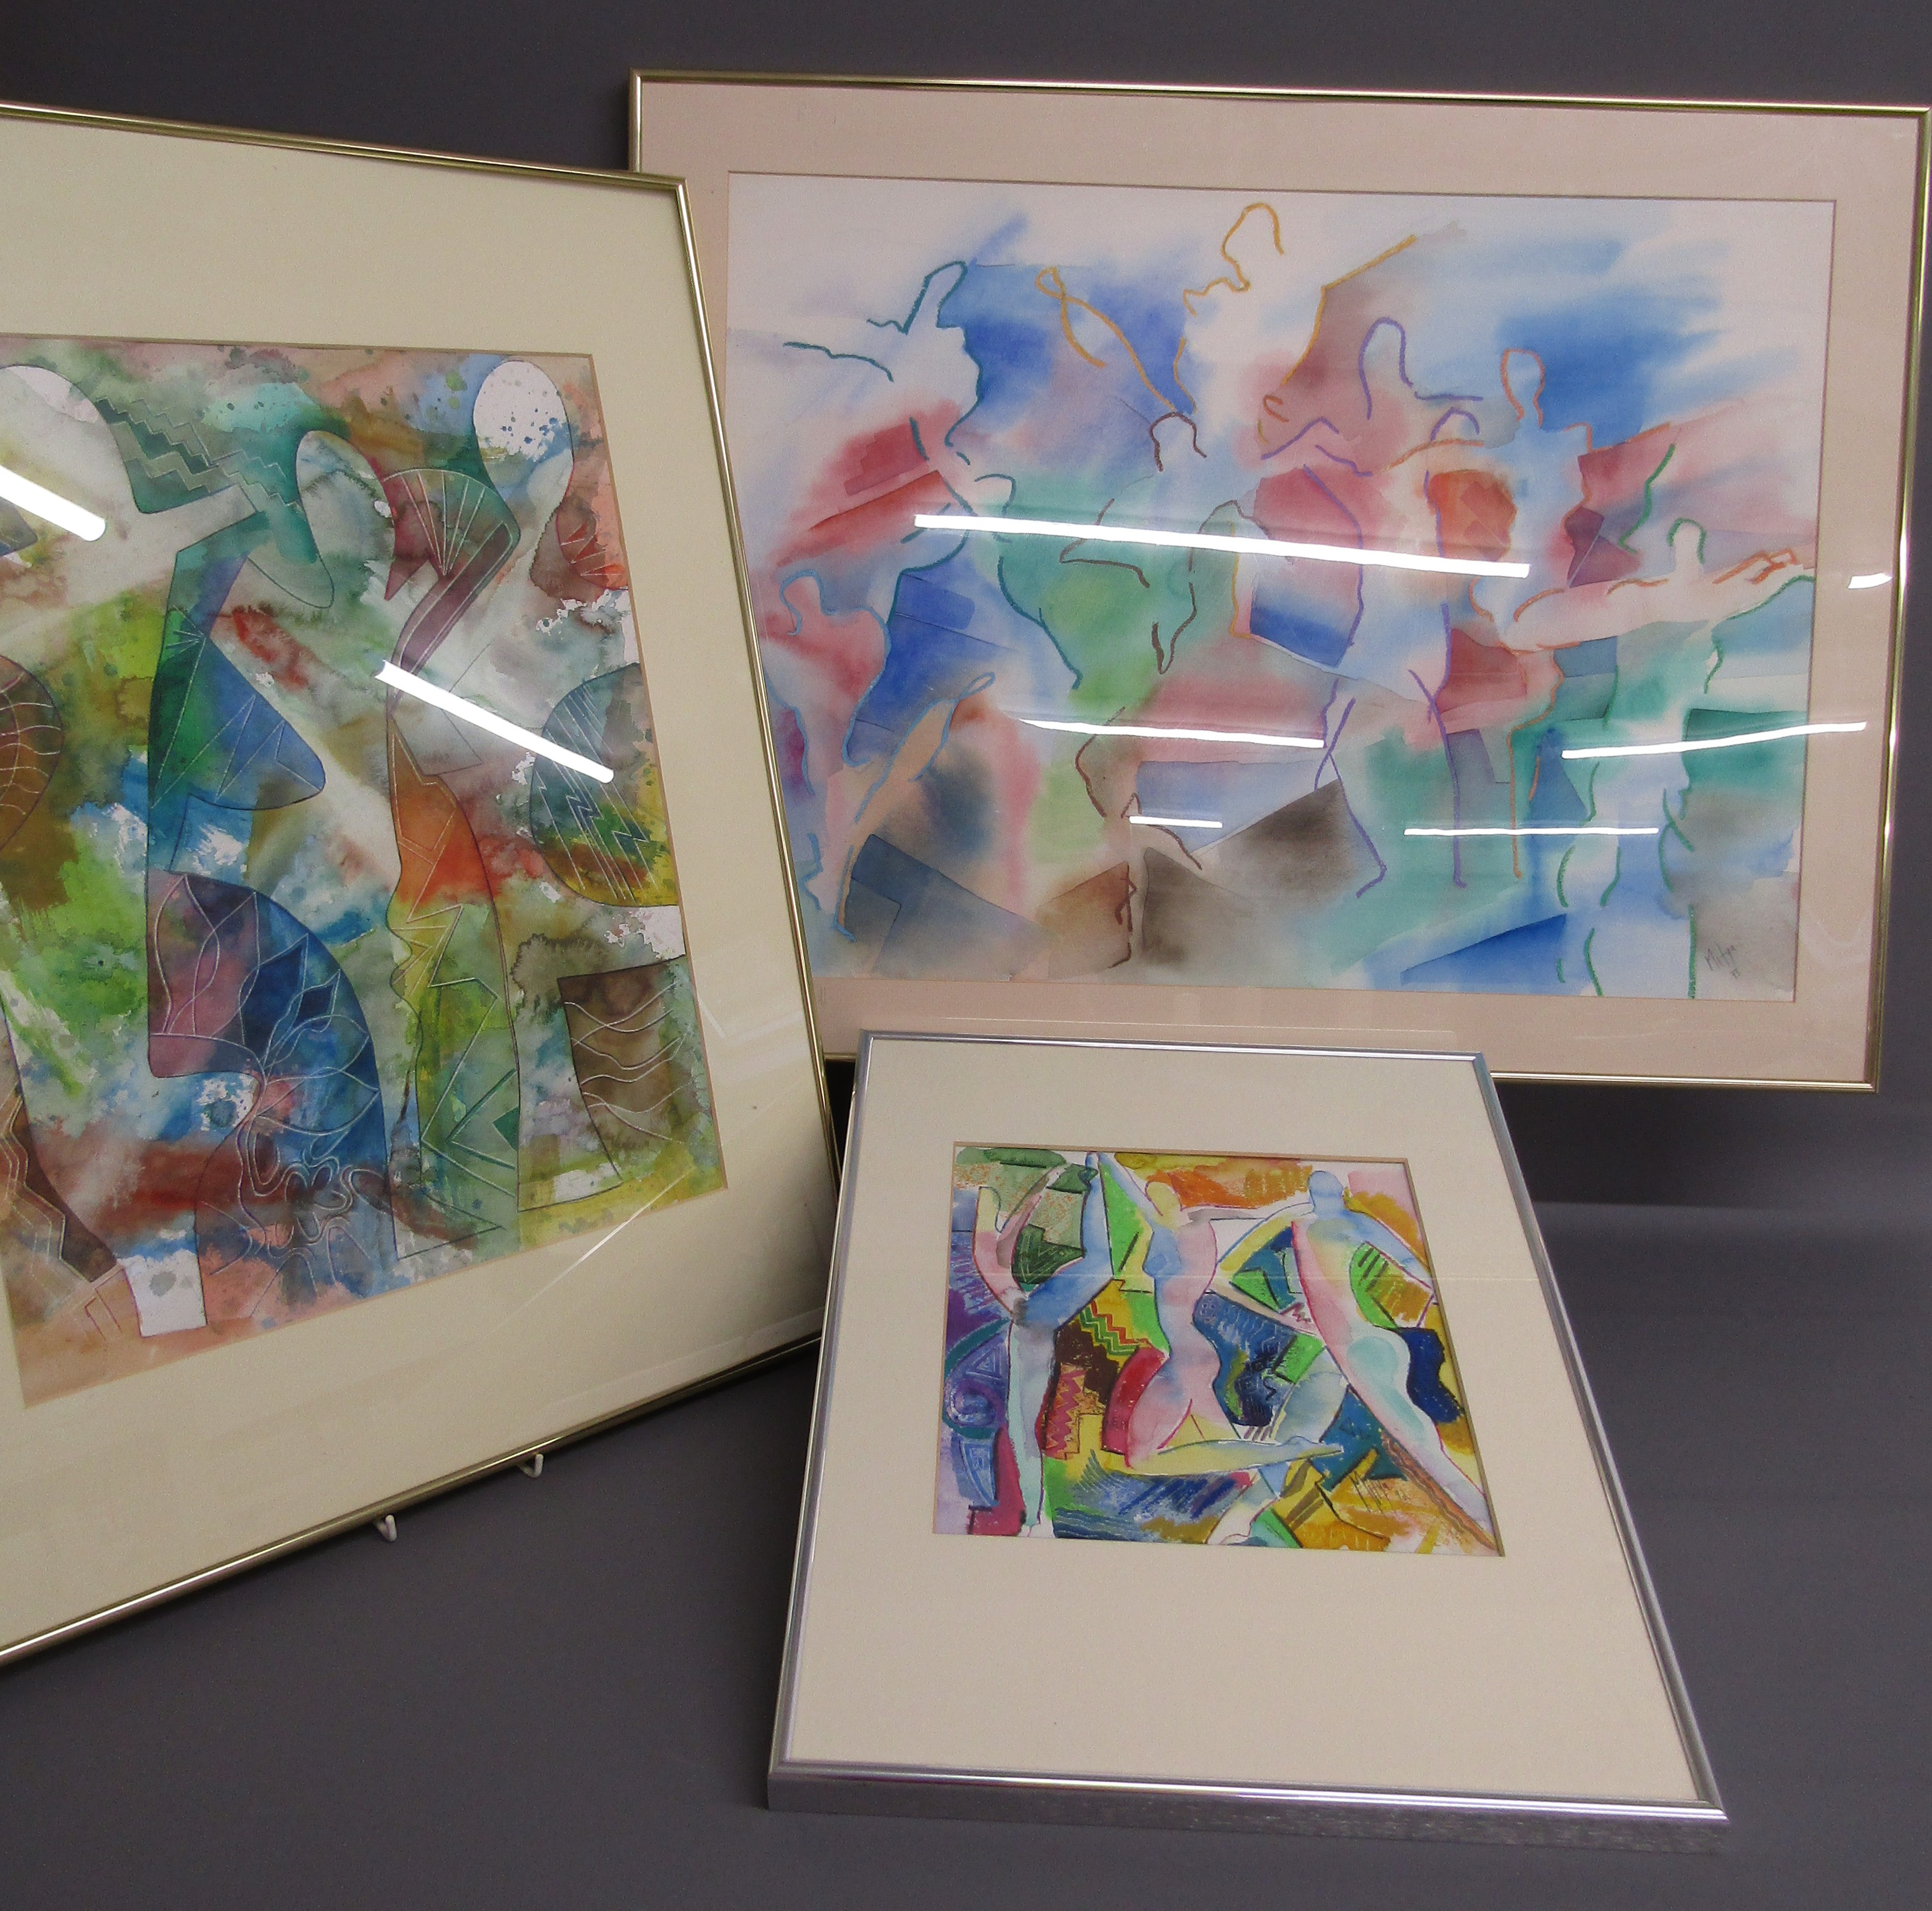 3 framed South African artist Mitya Sargeant 92/93 water colours - one with name to rear 'Pas de